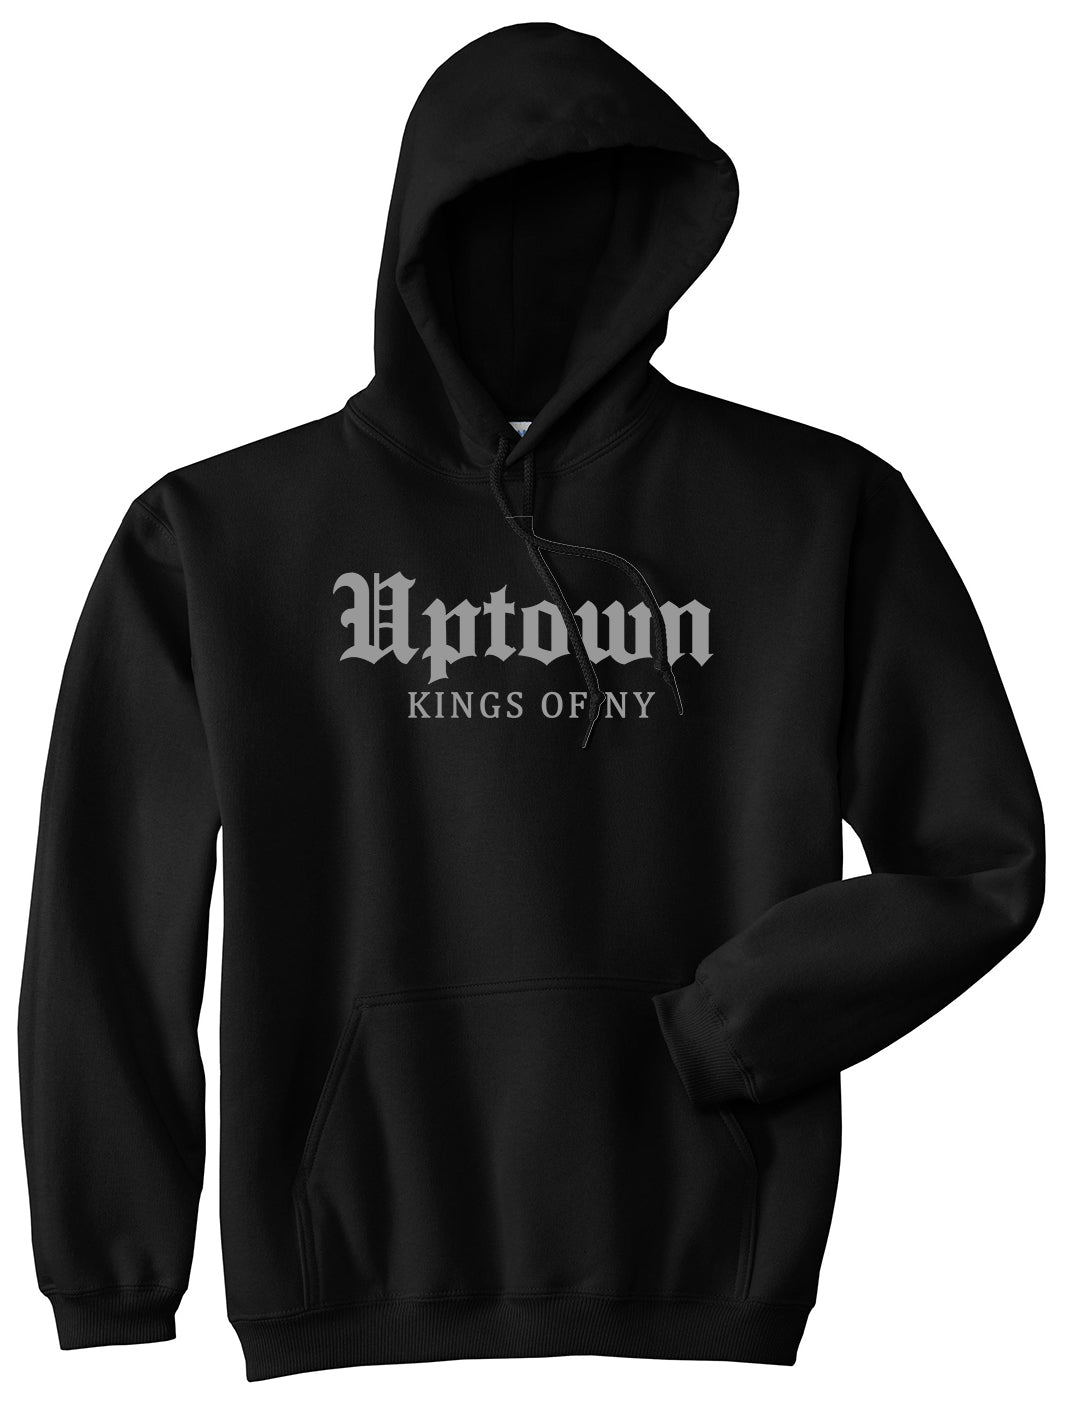 Uptown Old English Mens Pullover Hoodie Black by Kings Of NY